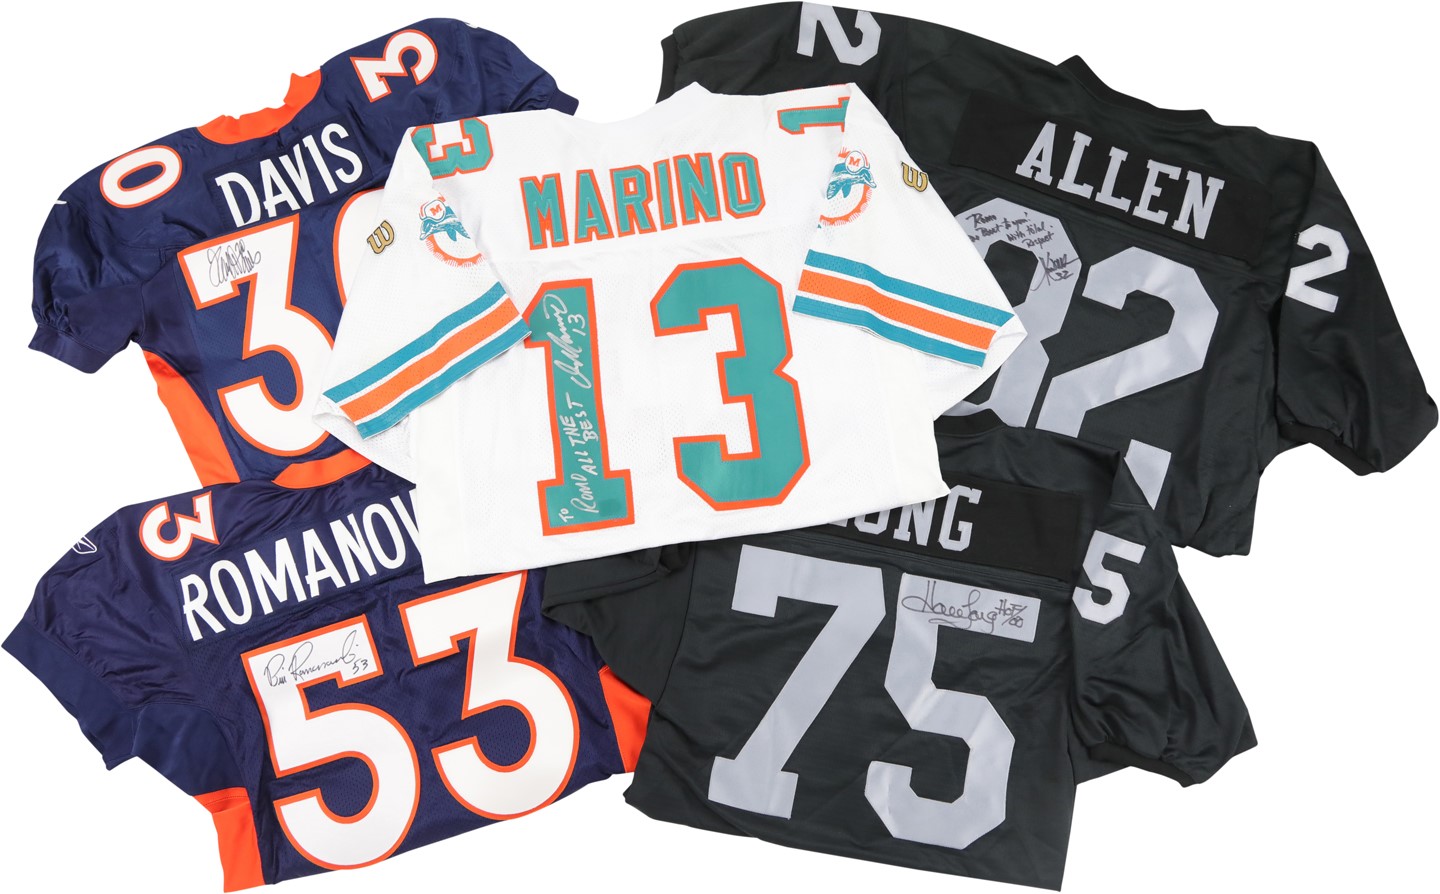 - Football Legends Signed Jersey Collection to Bill Romanowski (5)